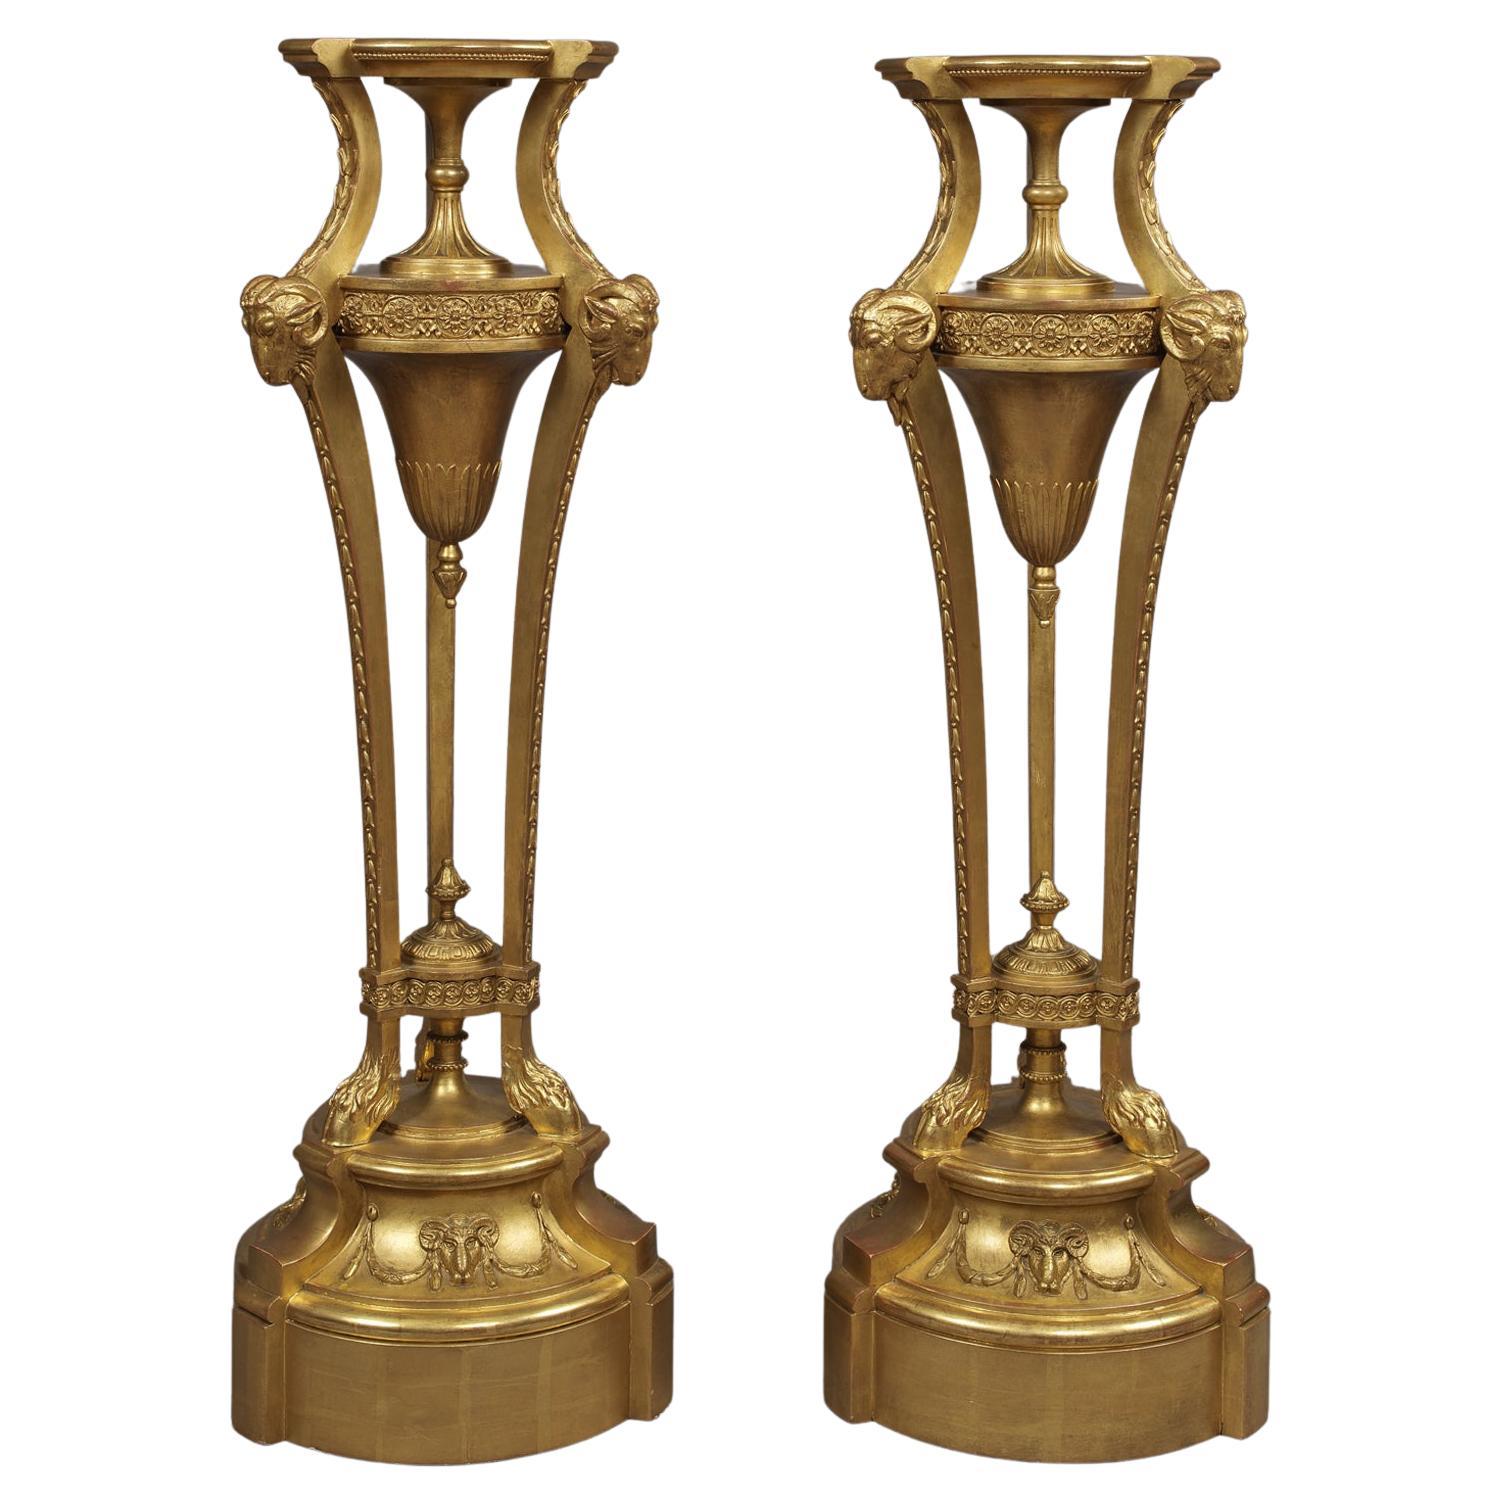 Pair of Giltwood and Gesso Pedestals